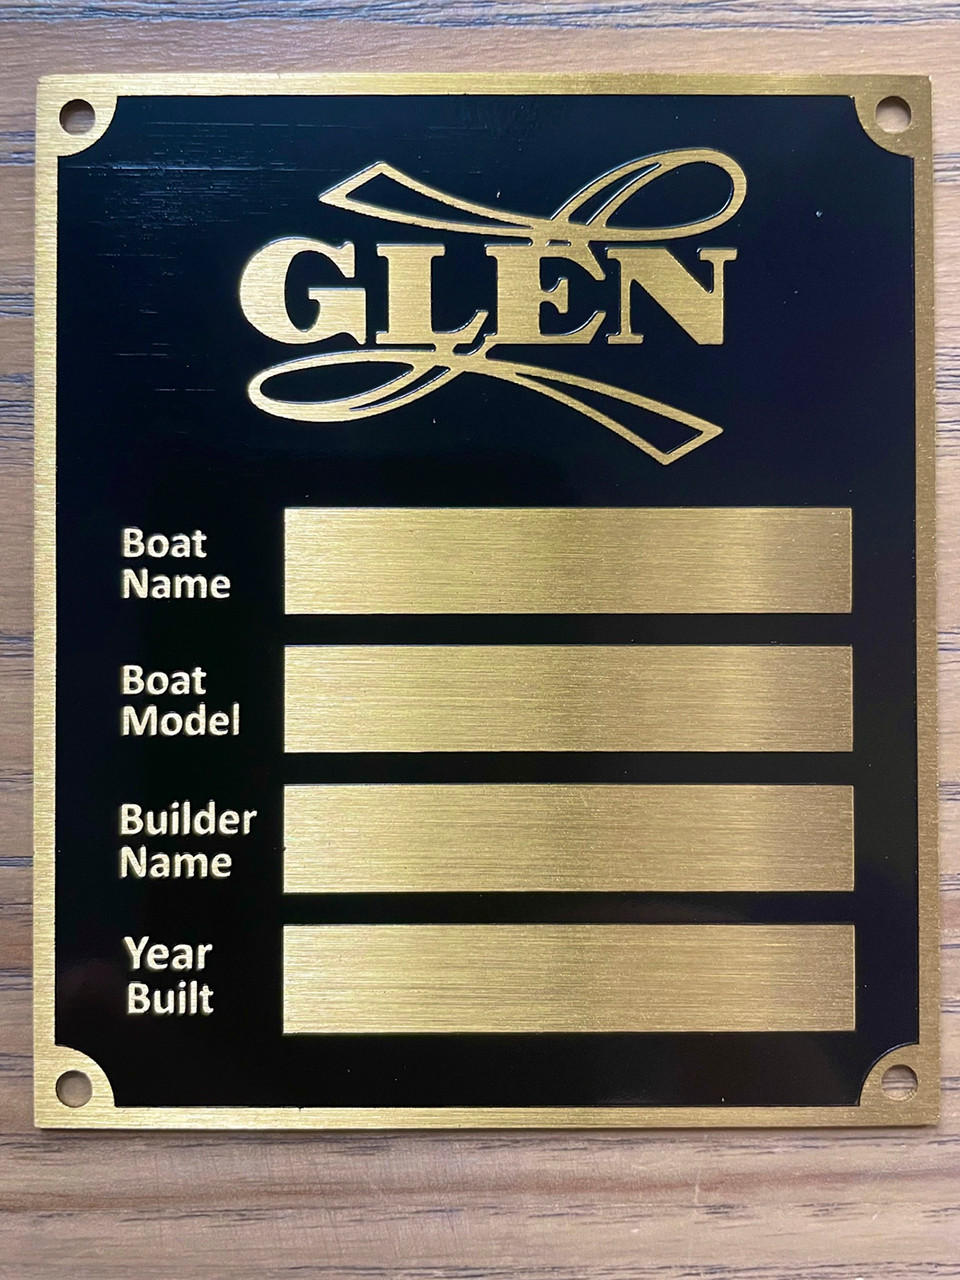 Name Plate Designs with Brass Finished